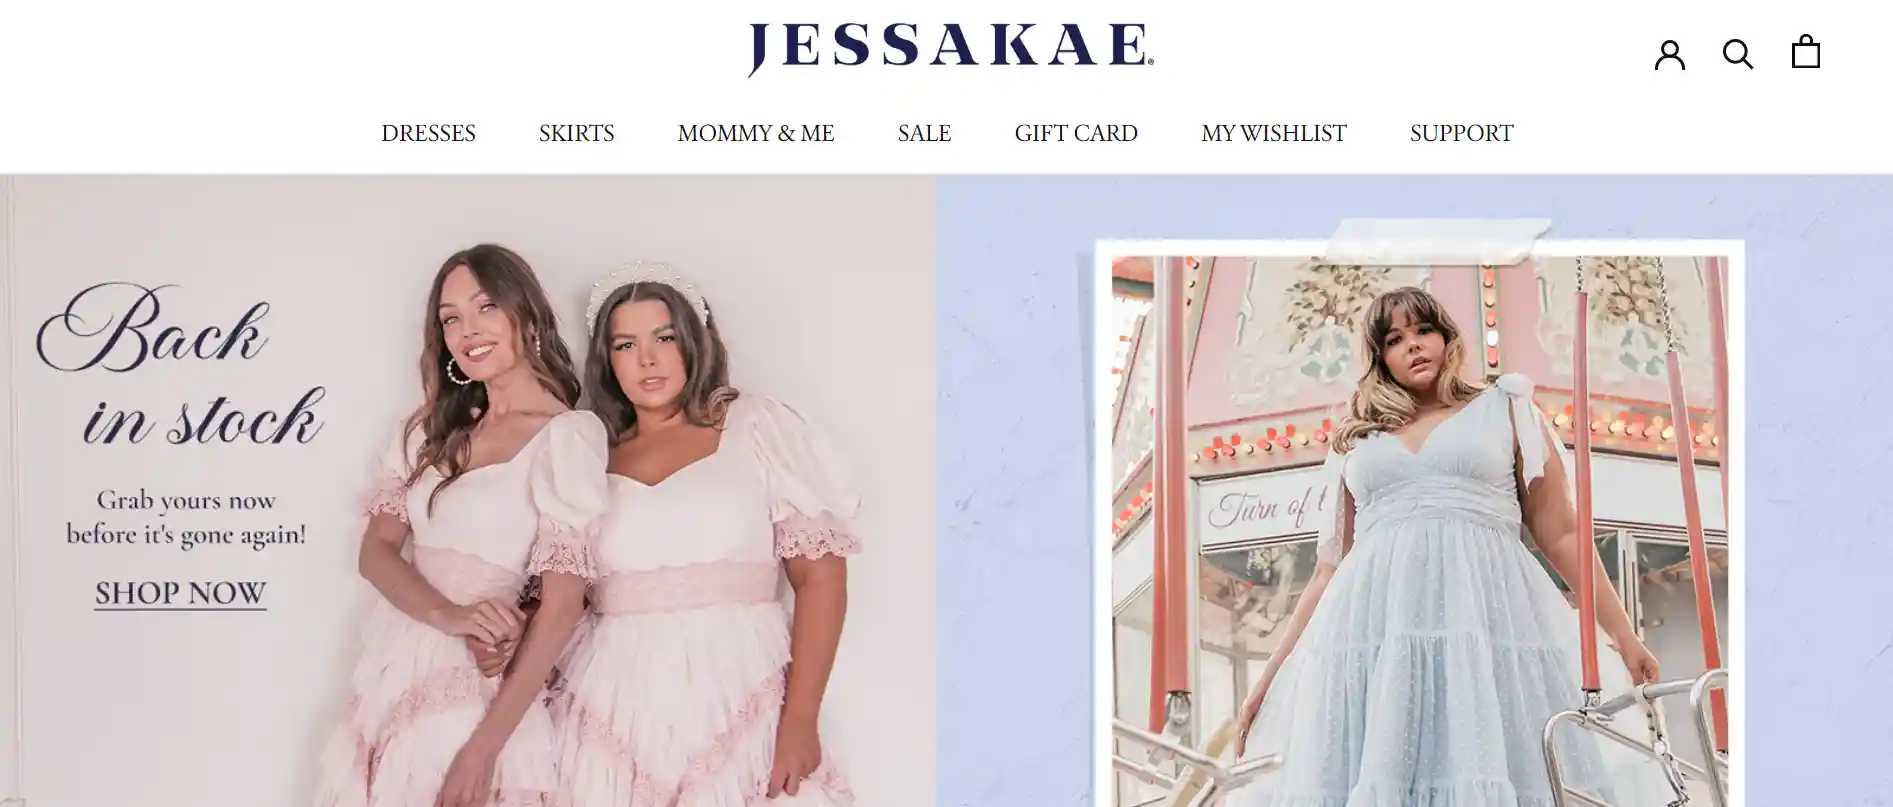 You are currently viewing JessaKae Reviews: Is It a Legitimate Fashion Brand Or Scam?